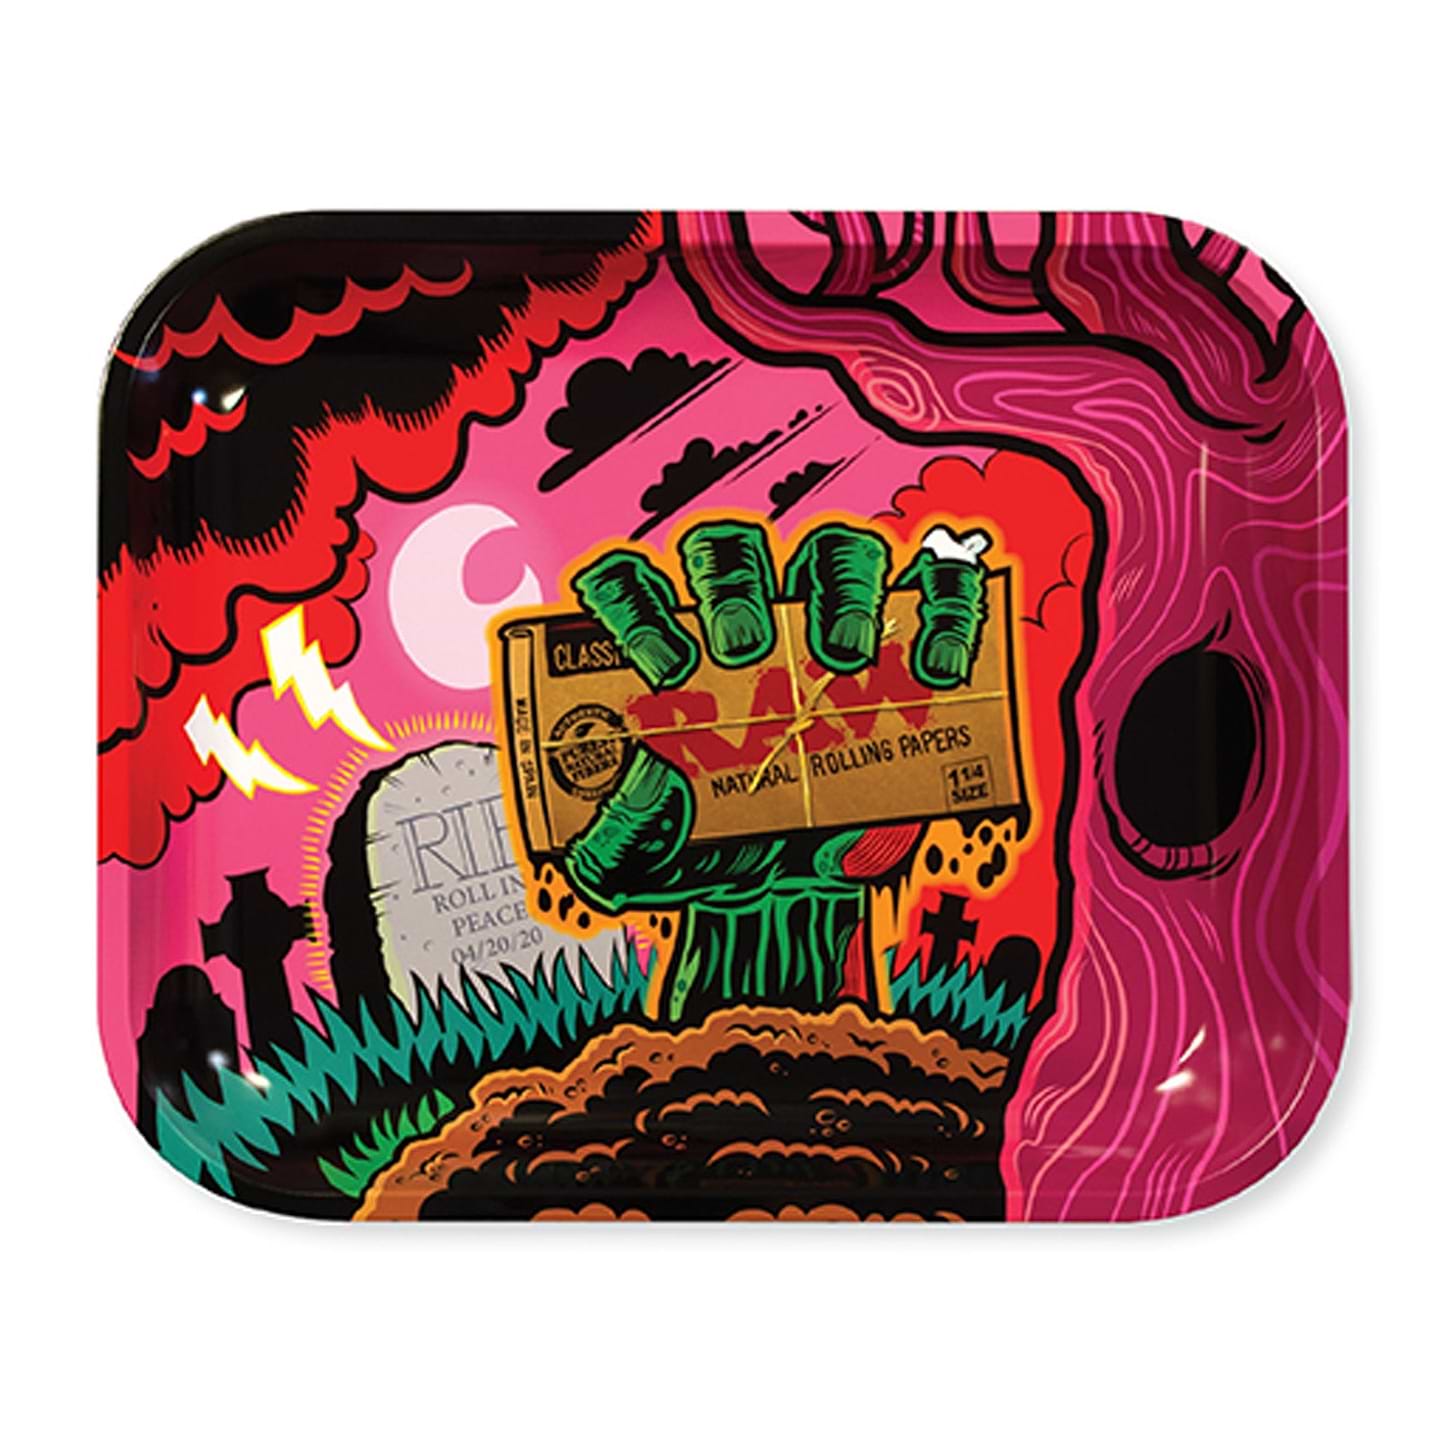 RAW Zombie Metal Rolling Tray - 13.5in